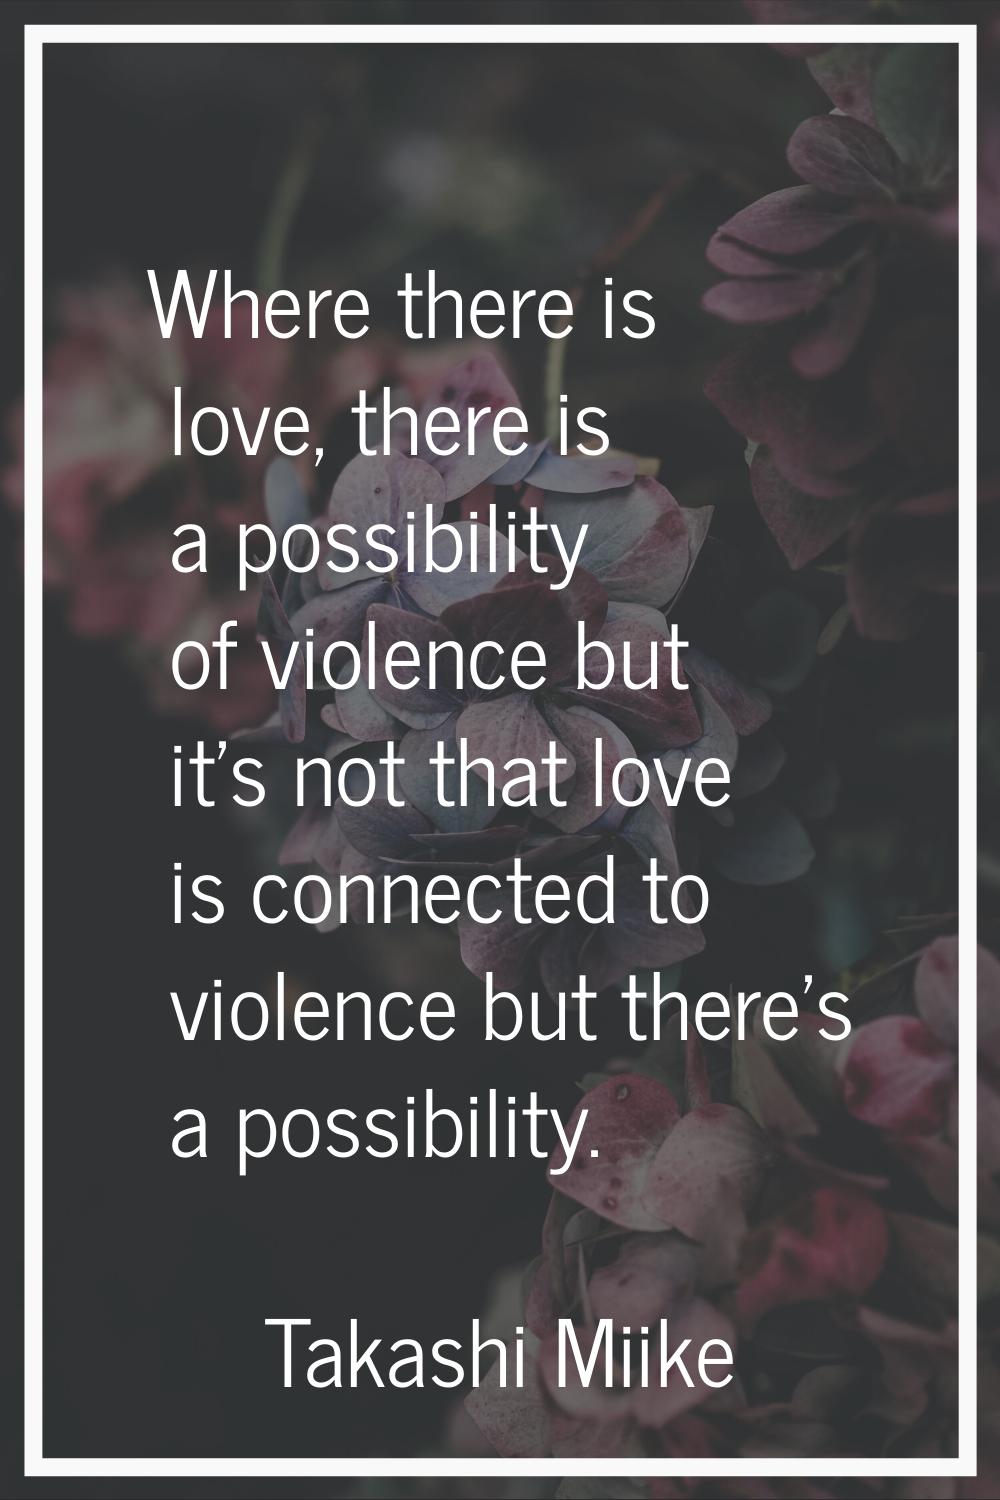 Where there is love, there is a possibility of violence but it's not that love is connected to viol